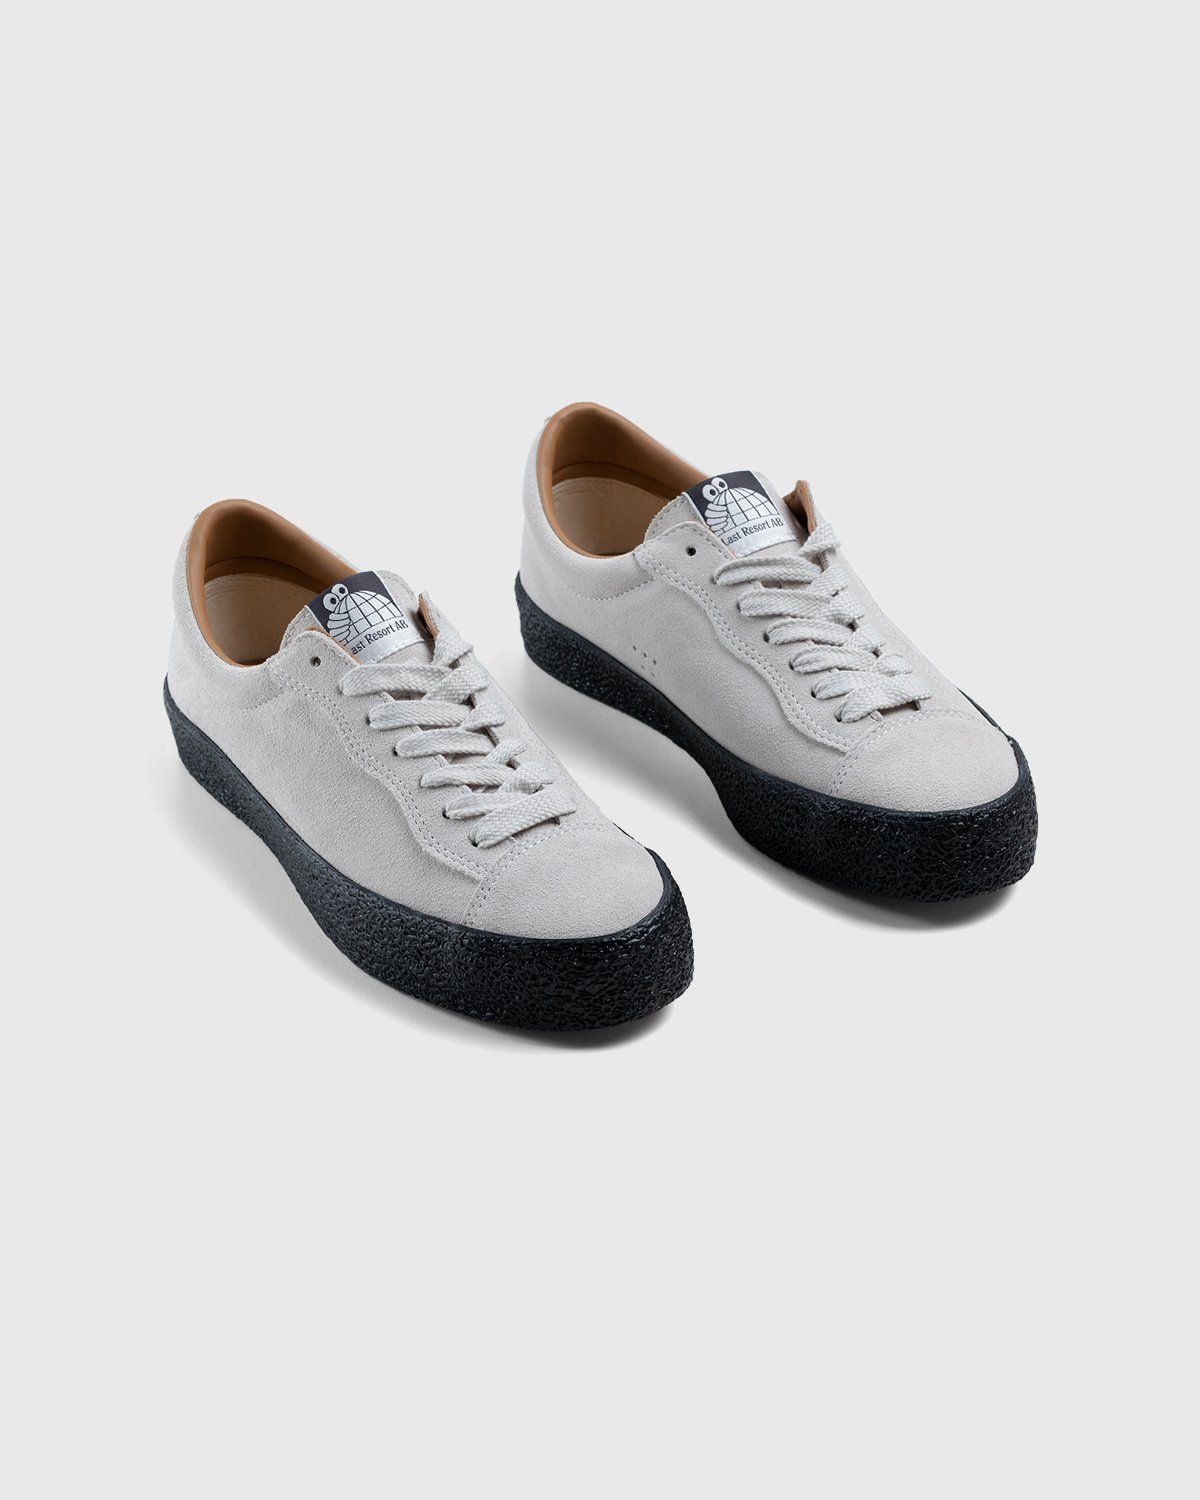 Last Resort AB – VM002 Suede Lo White/Black - Low Top Sneakers - White - Image 3